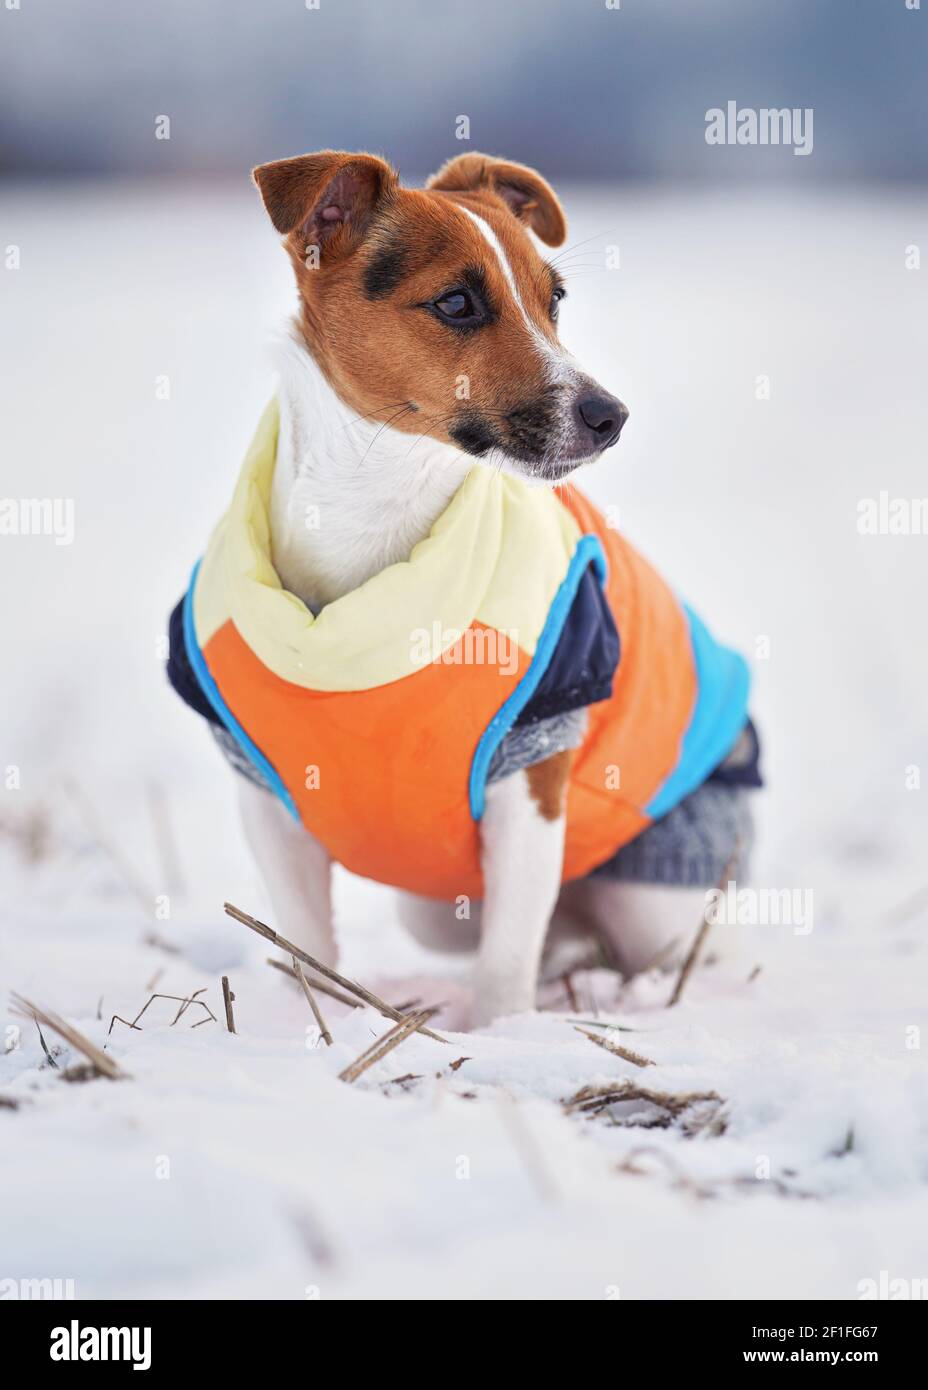 Small Jack Russell terrier dog in bright orange yellow and blue winter  jacket sitting on snow covered ground Stock Photo - Alamy